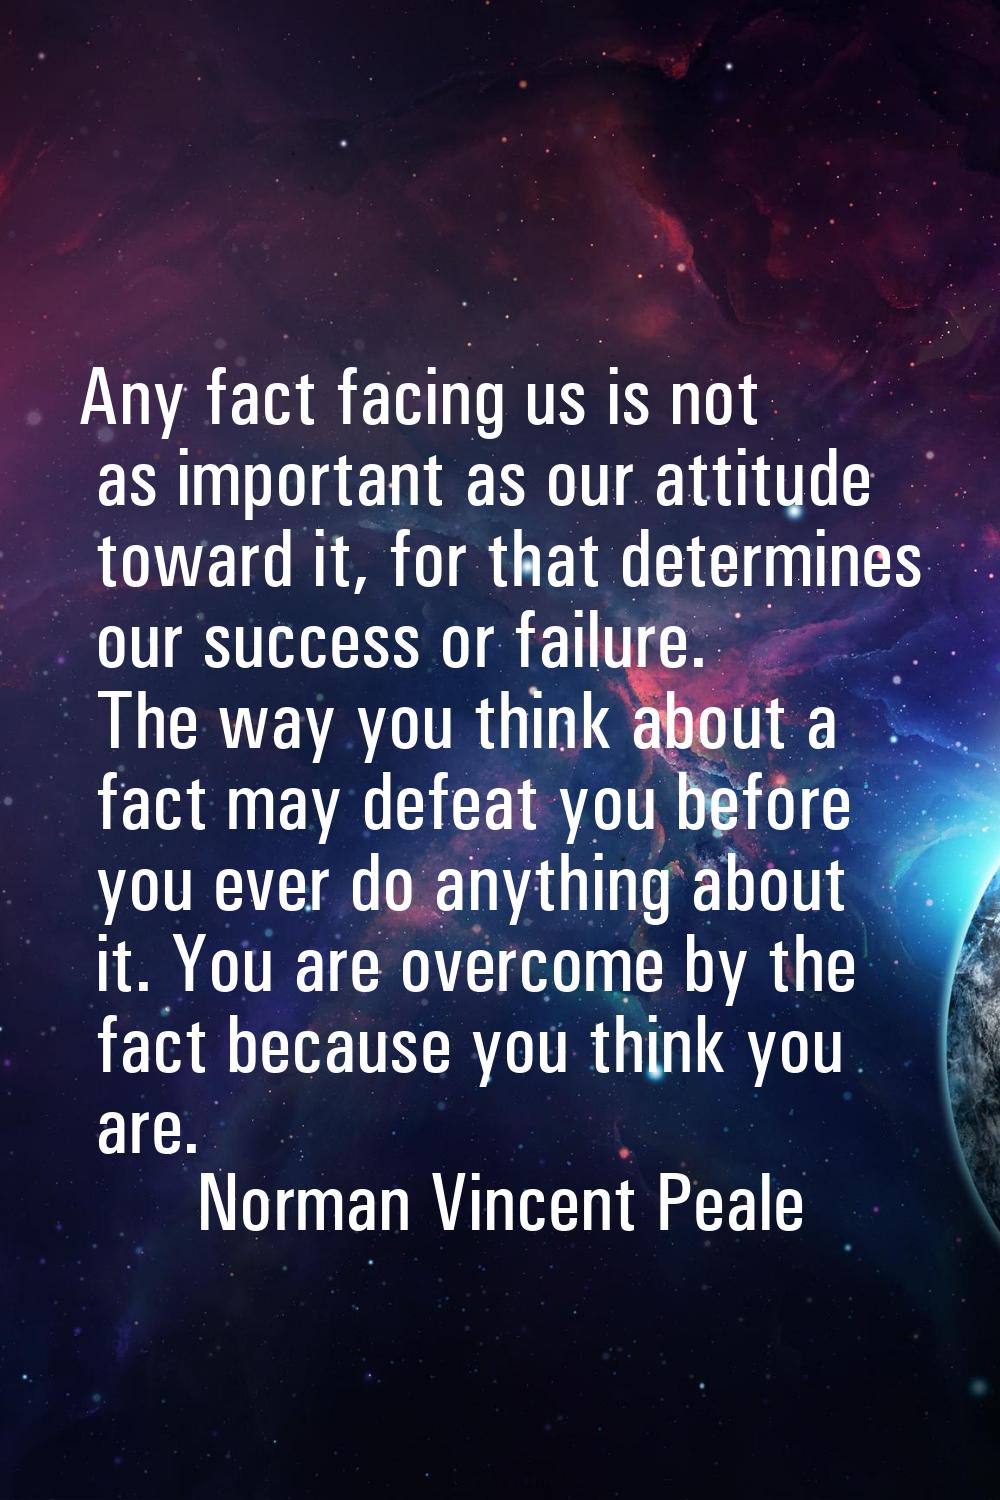 Any fact facing us is not as important as our attitude toward it, for that determines our success o